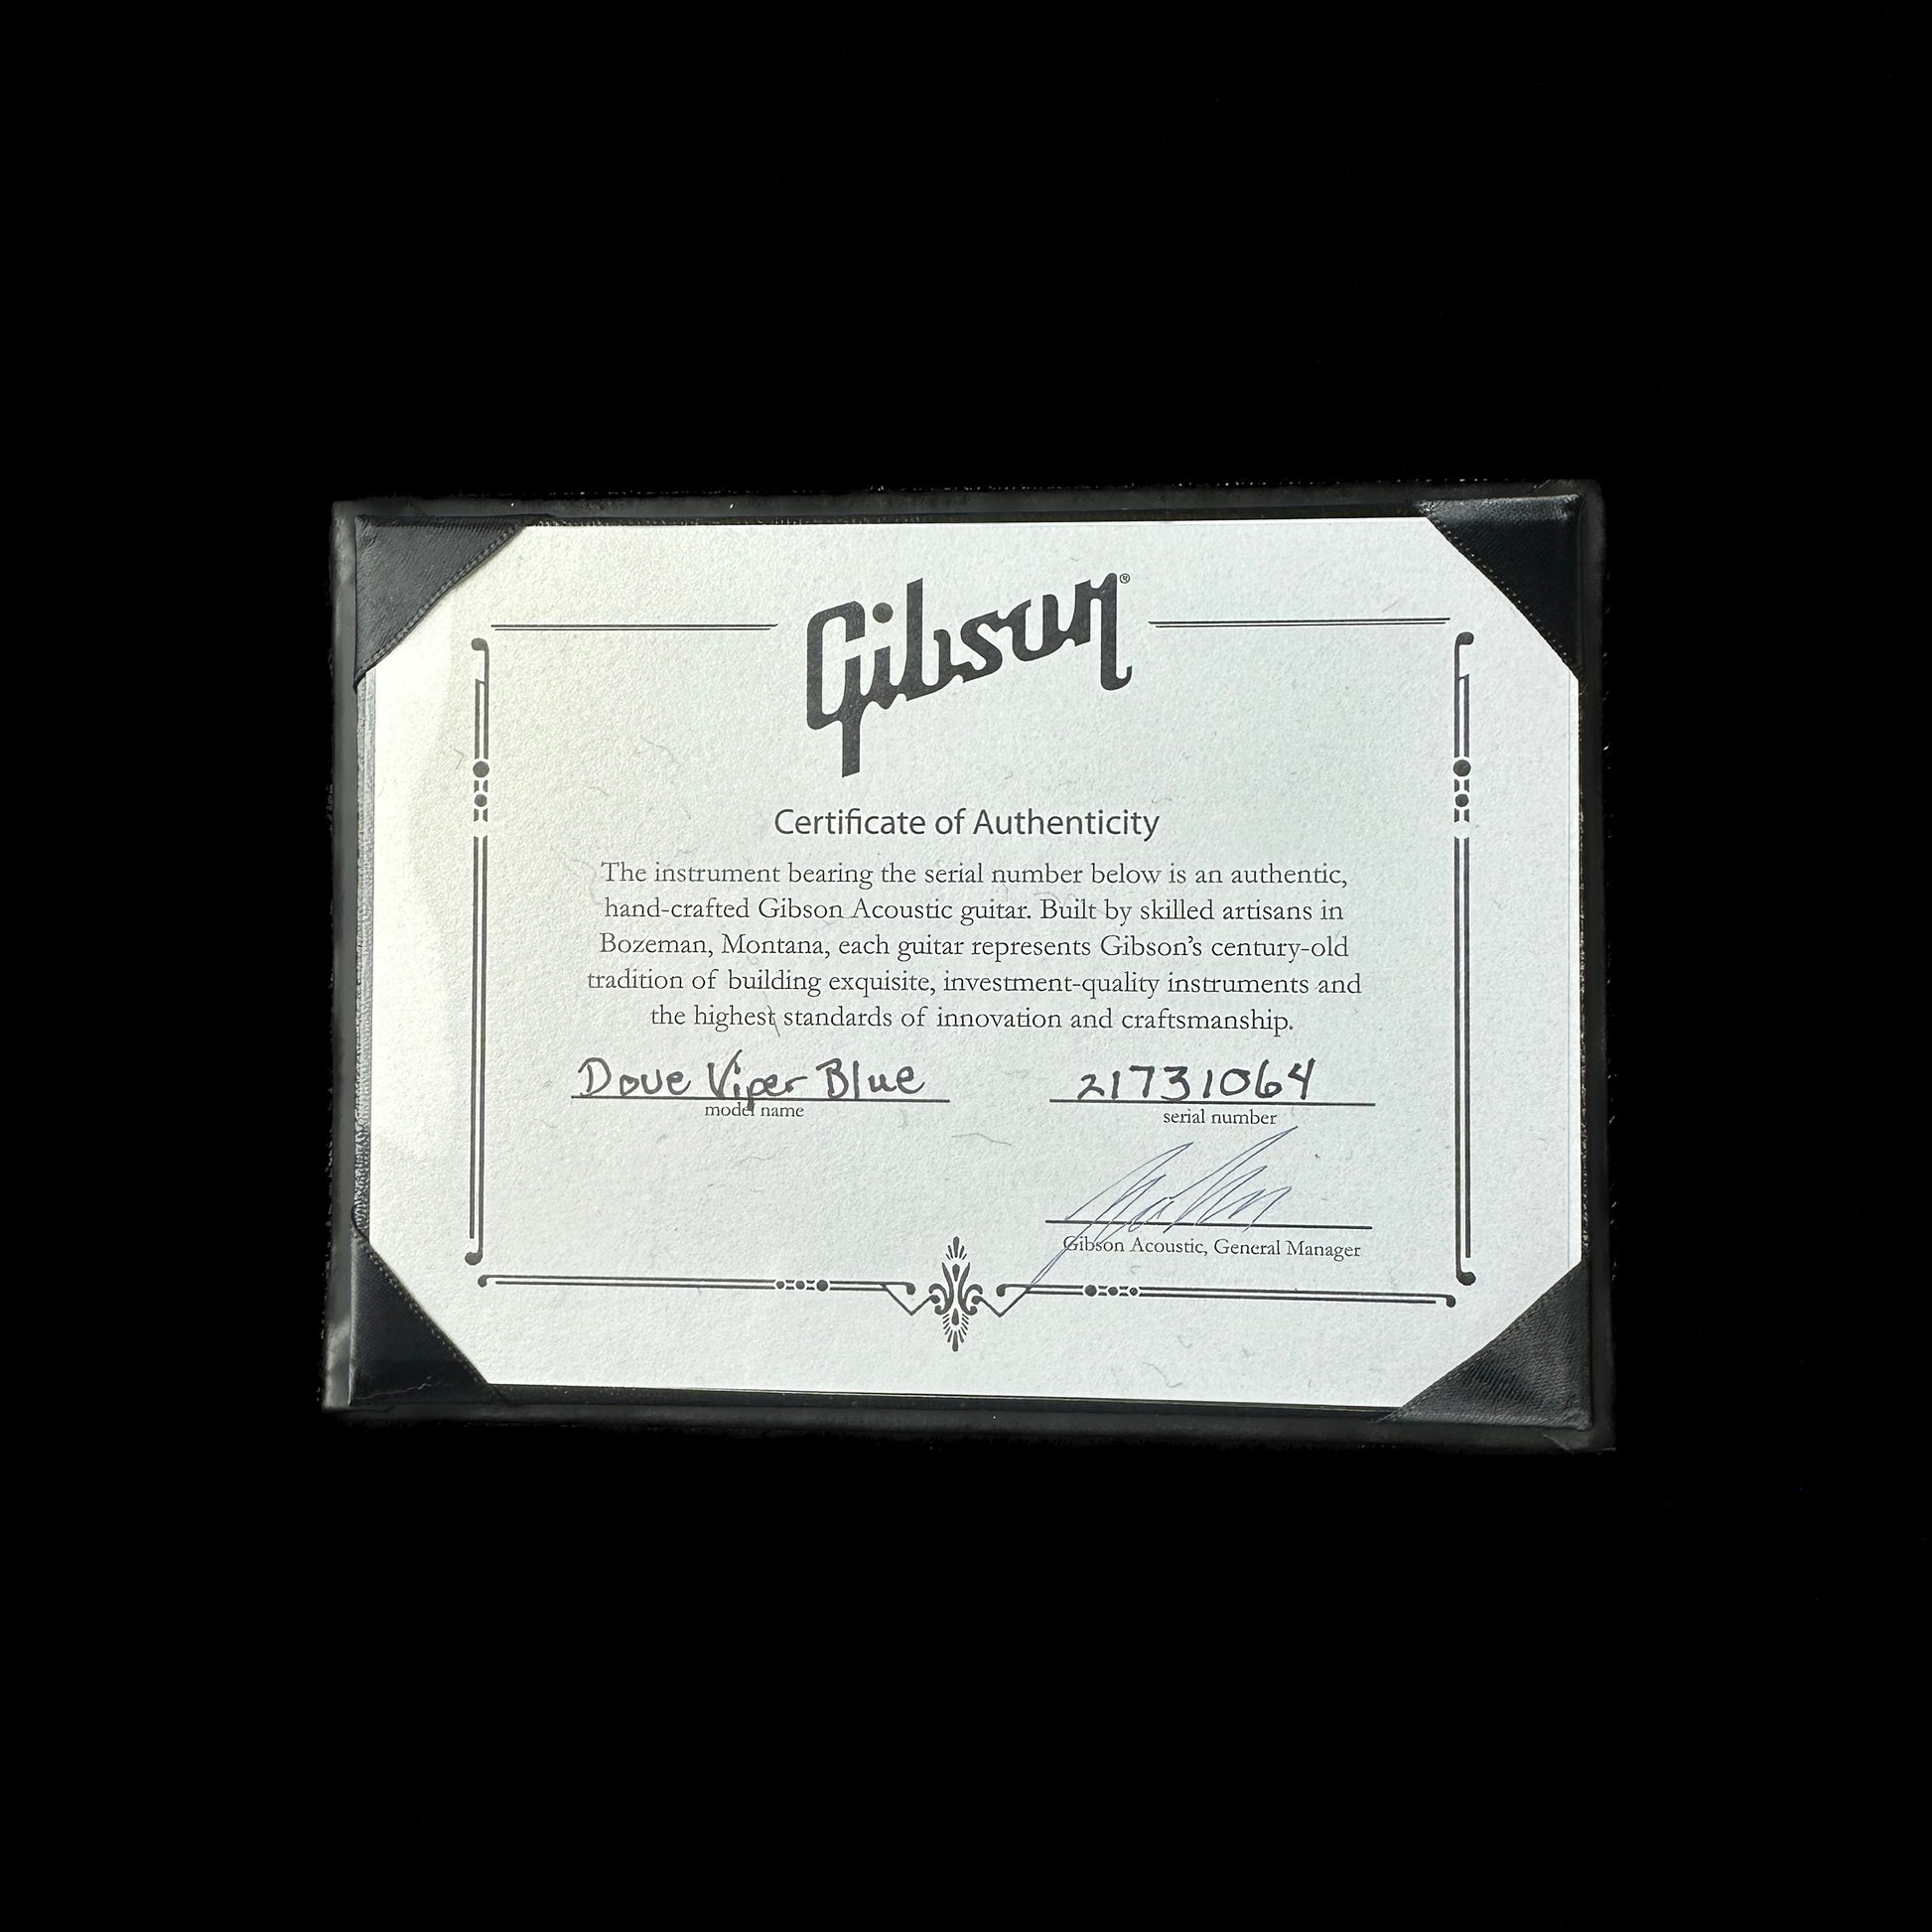 Certificate of authenticity for Used Gibson Dove Viper Blue.